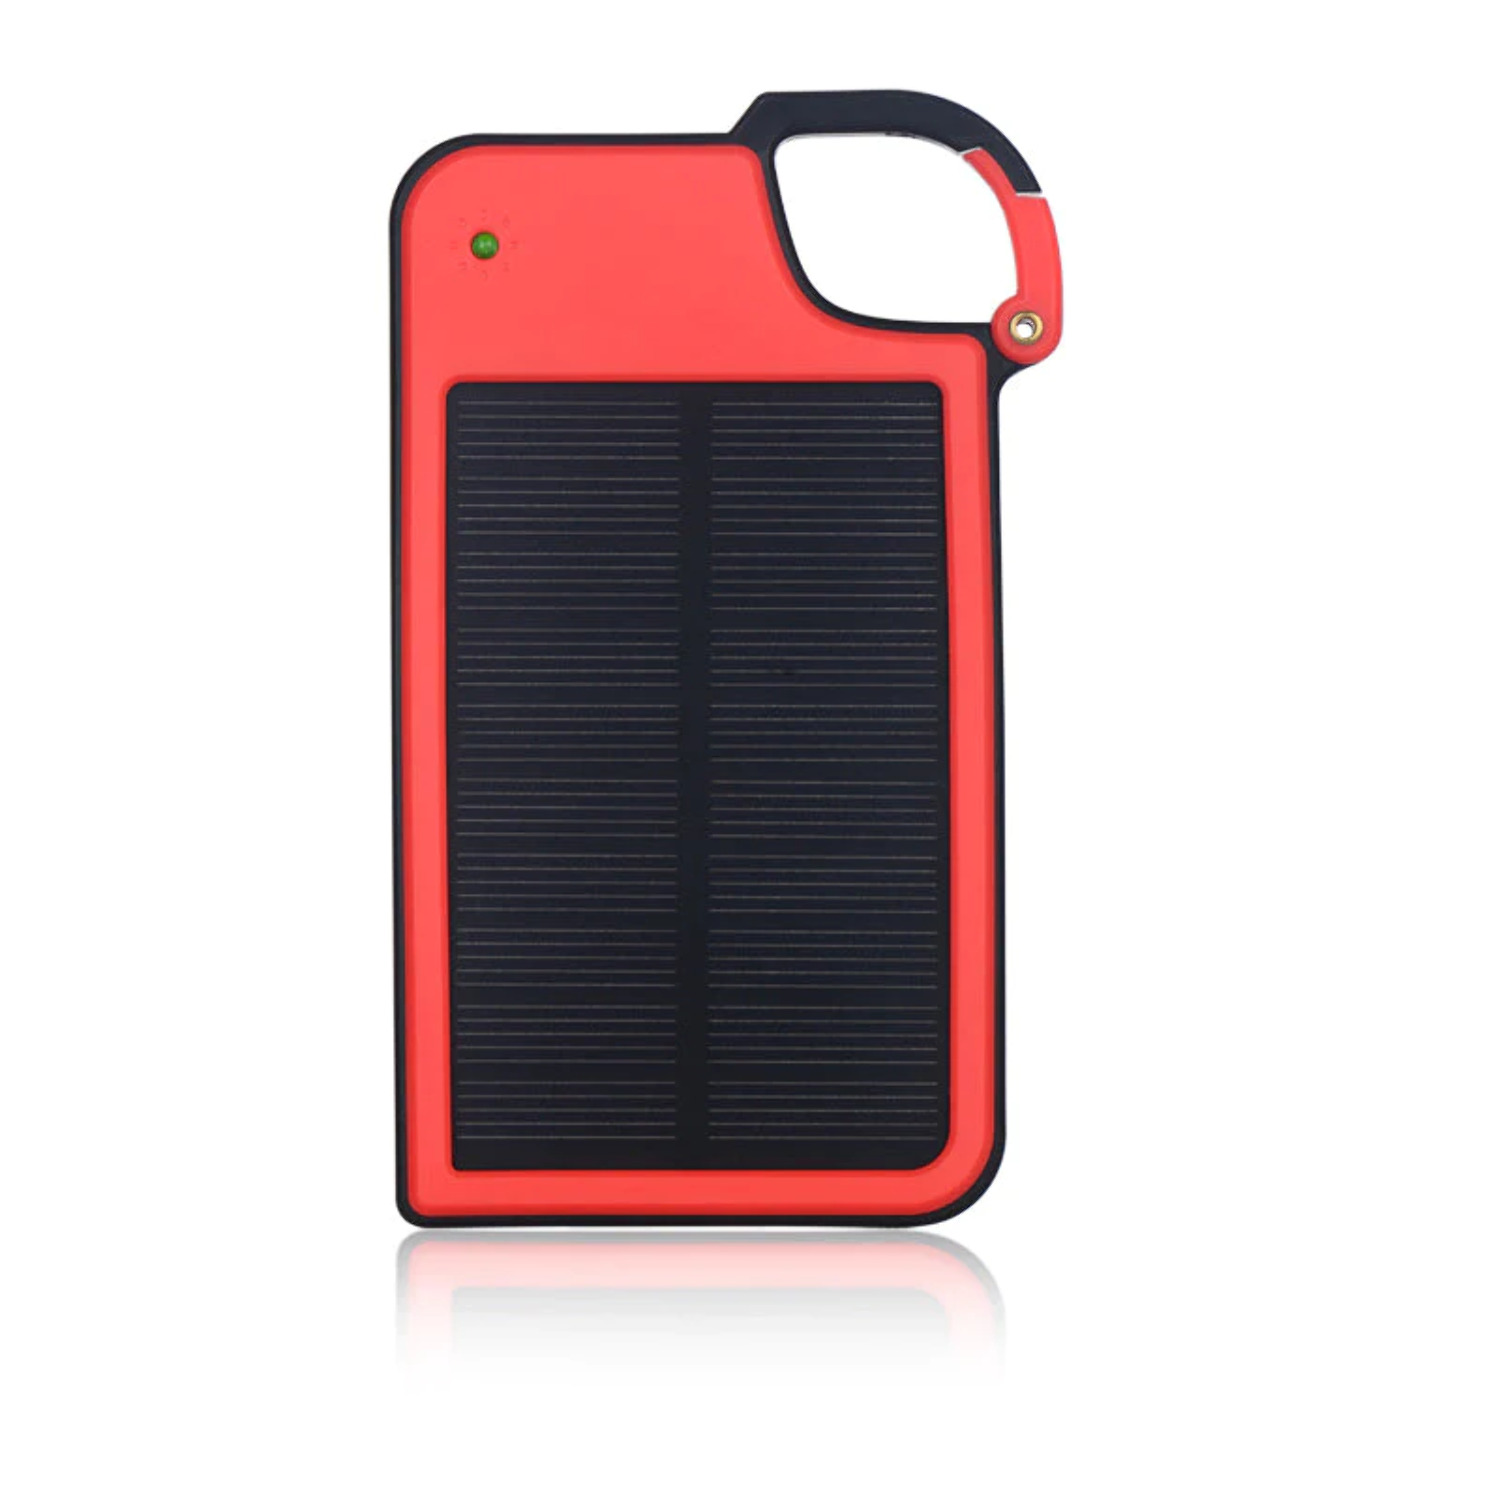 Clip-on Tag Along Solar Charger and 4050 mAh PowerBank For Your Smartphone - image 4 of 6